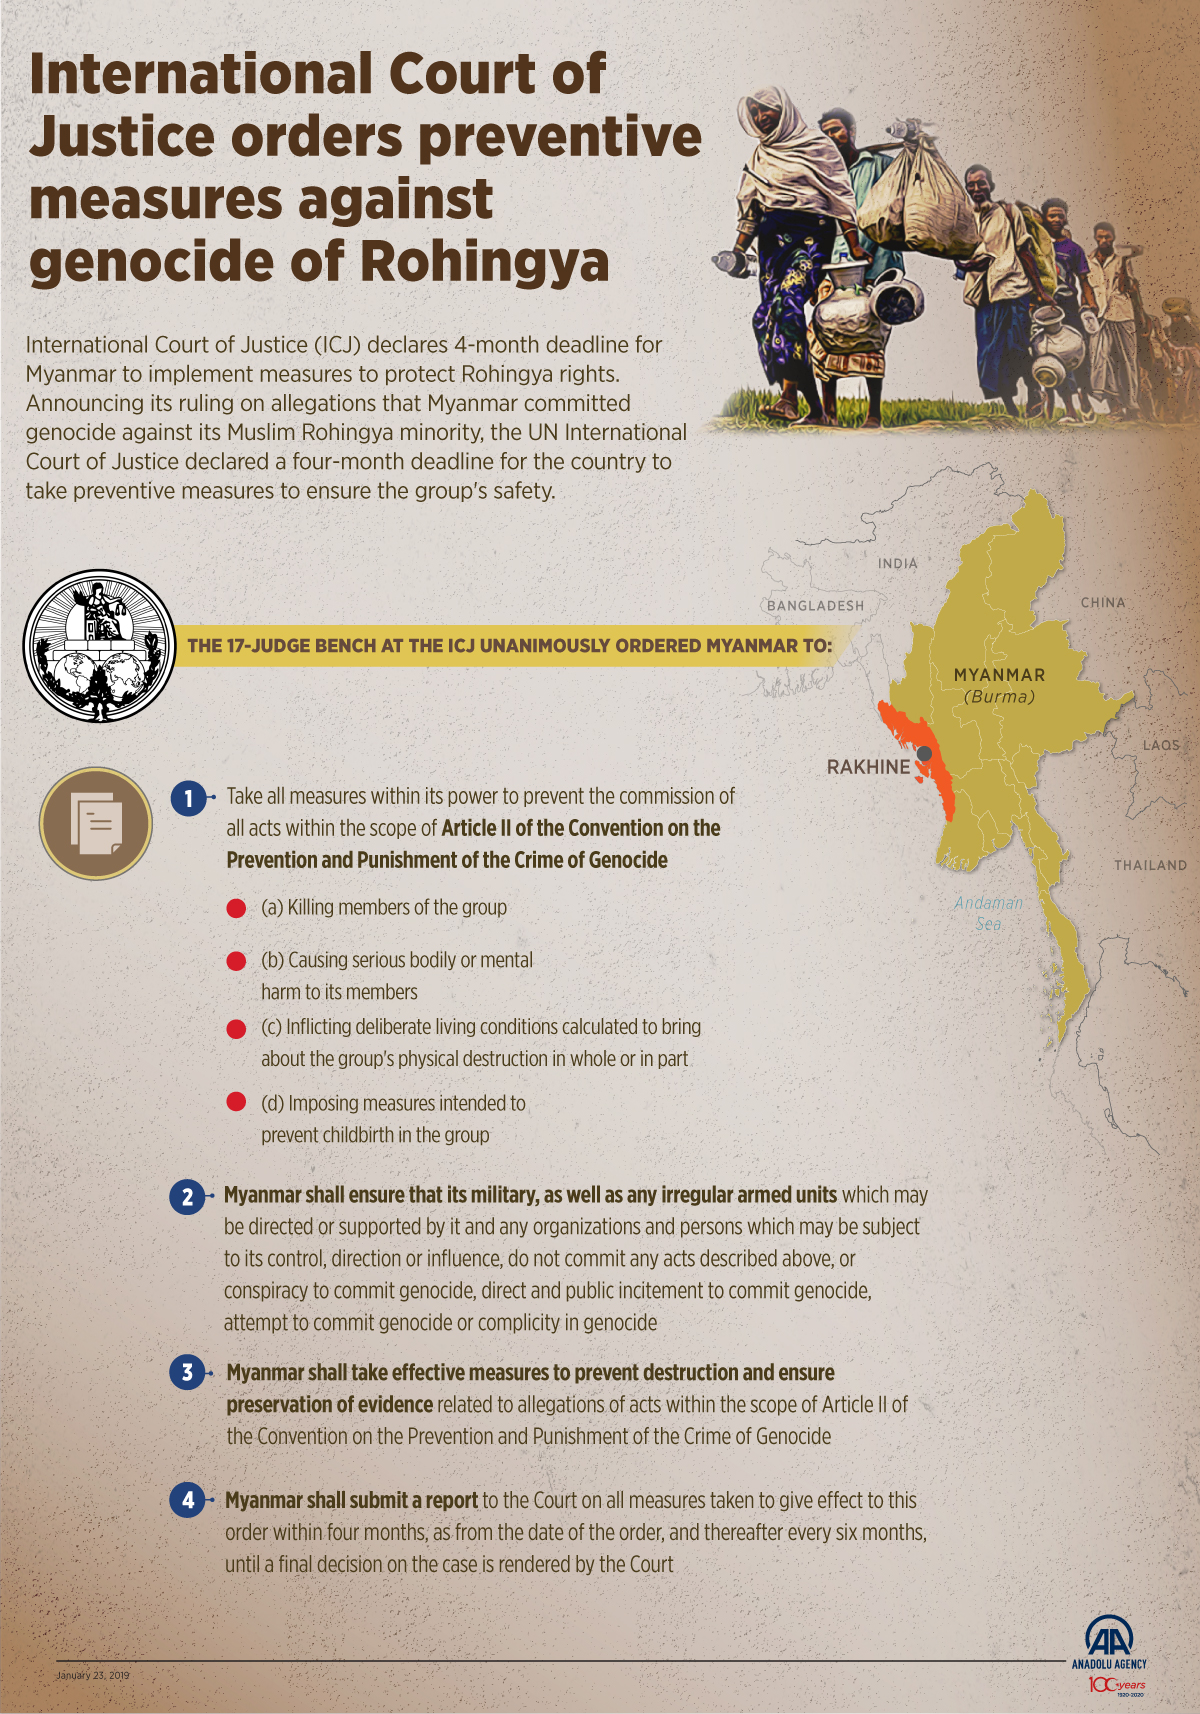 International Court of Justice orders preventive measures against genocide of Rohingya